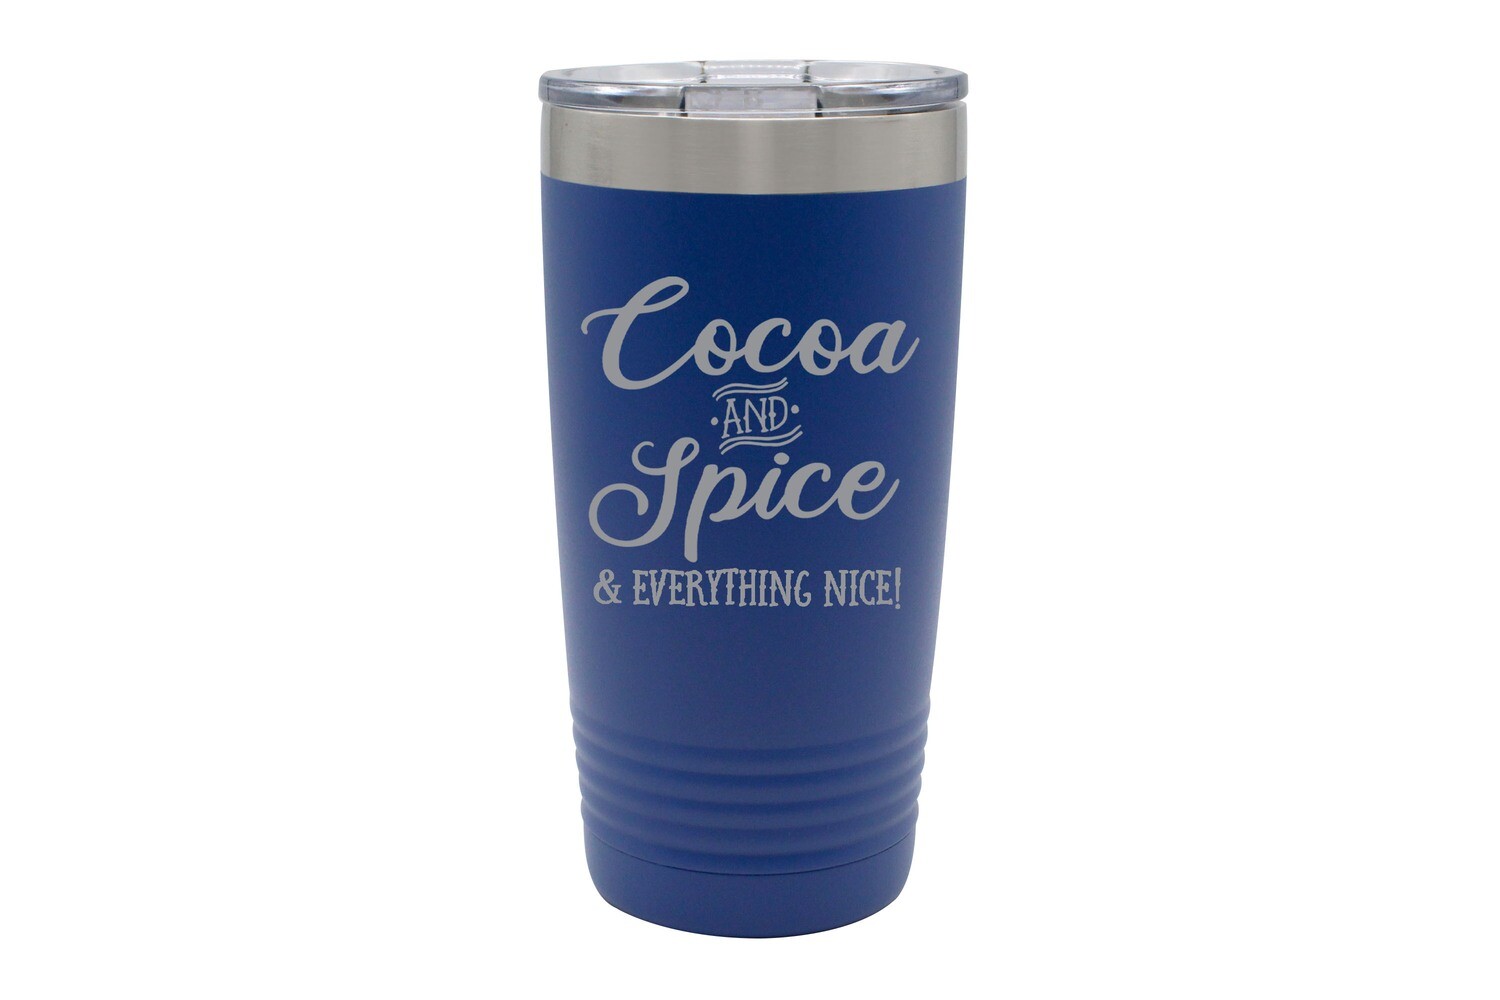 Cocoa and Spice & Everything Nice! Insulated Tumbler 20 oz